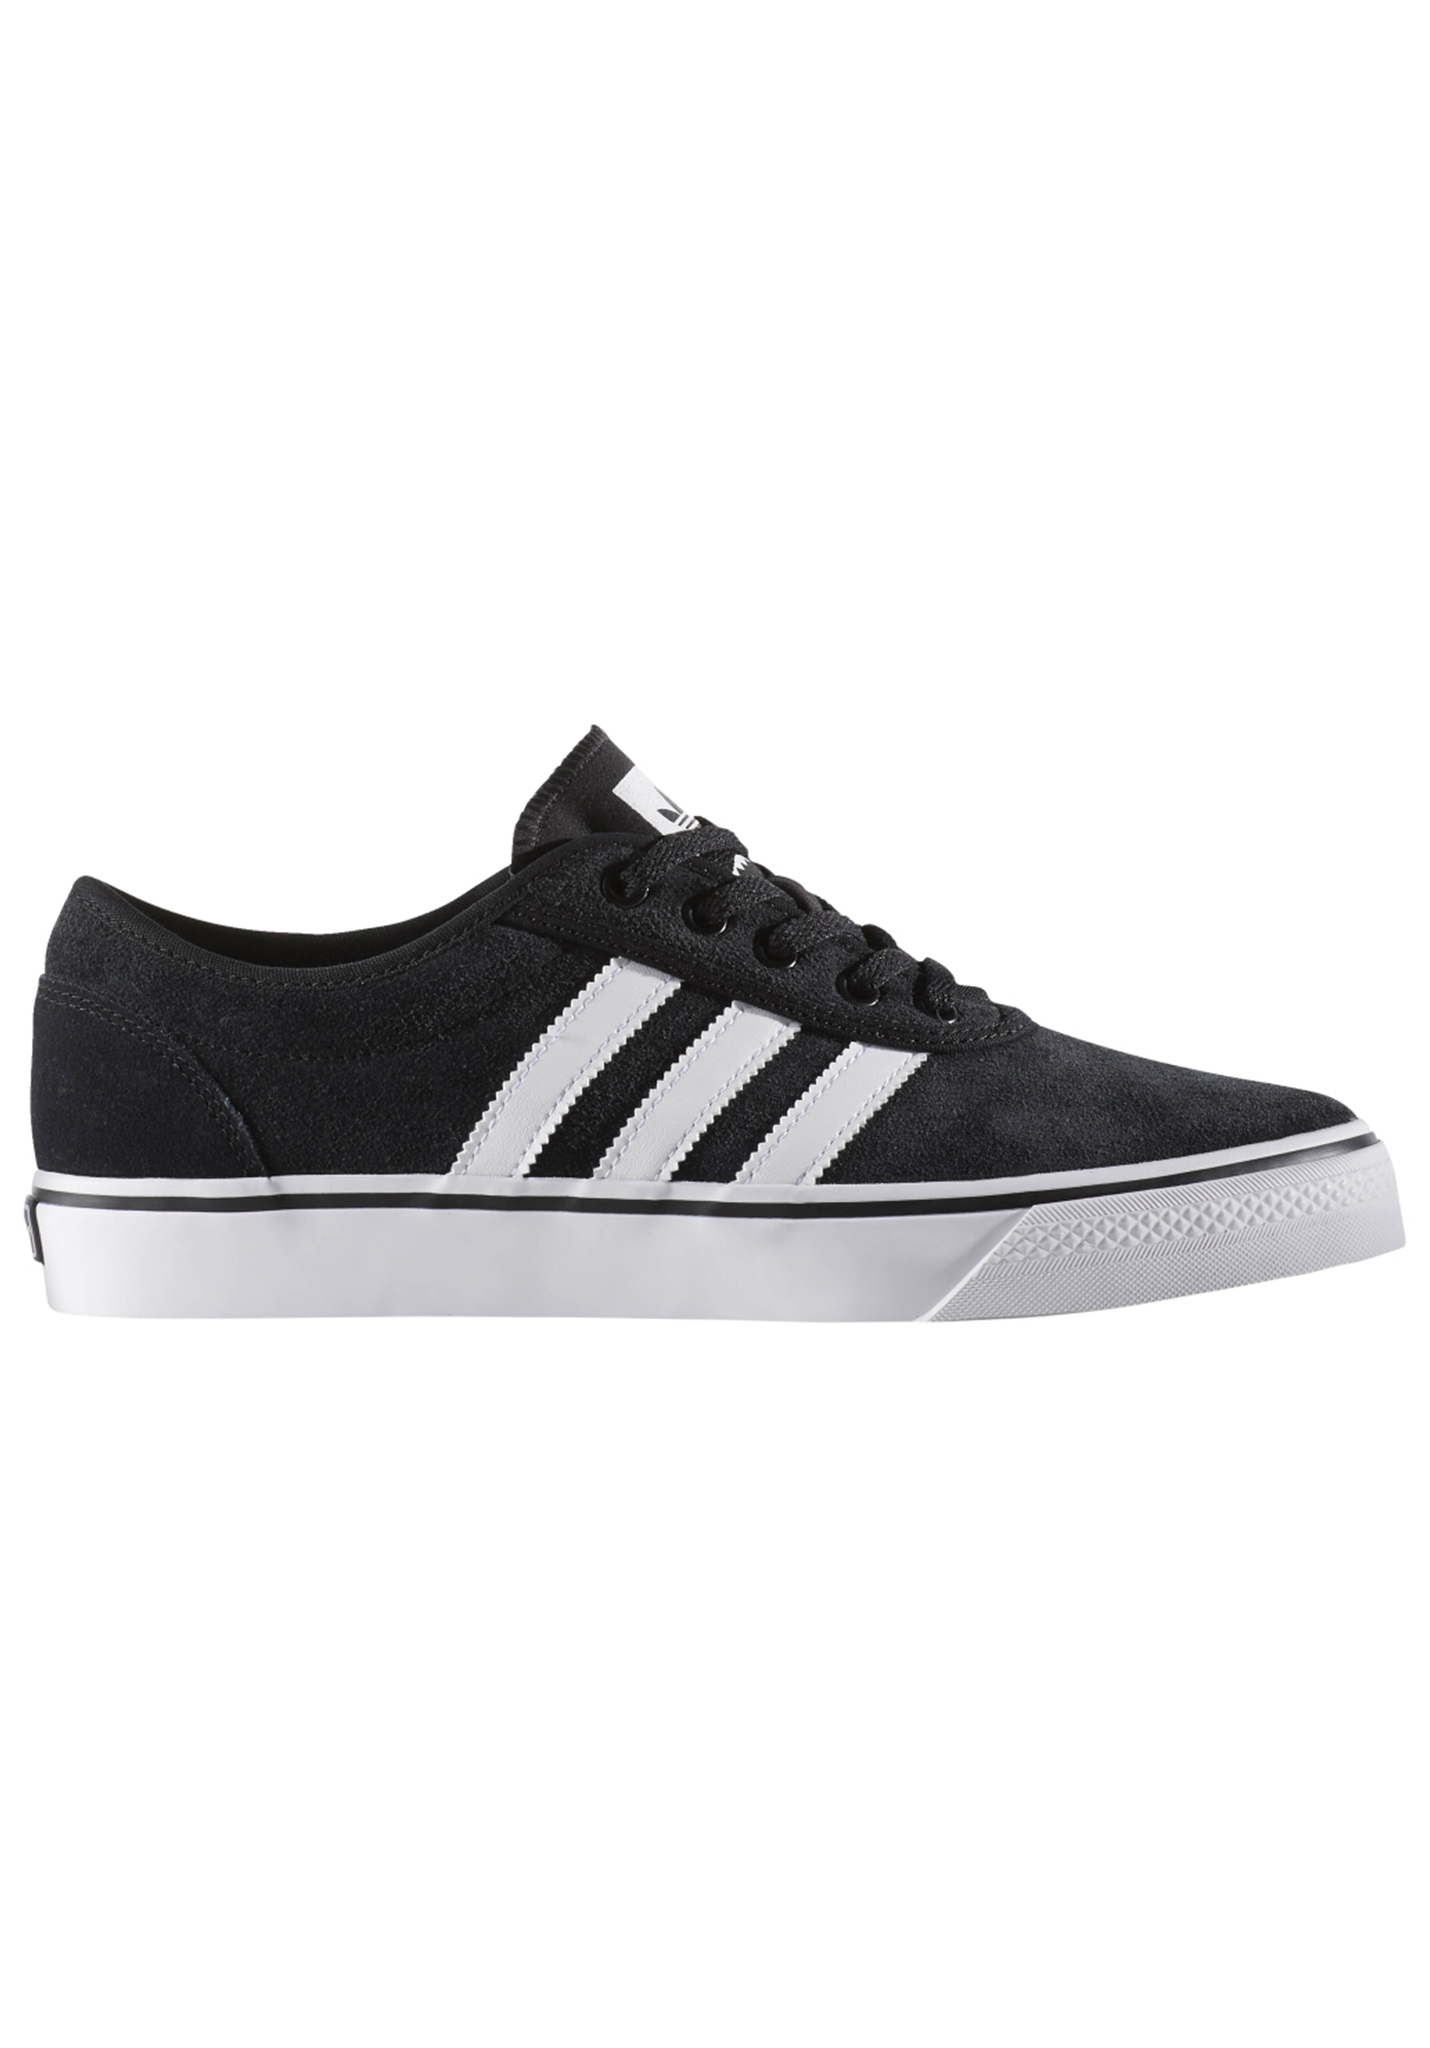 adidas ease homme